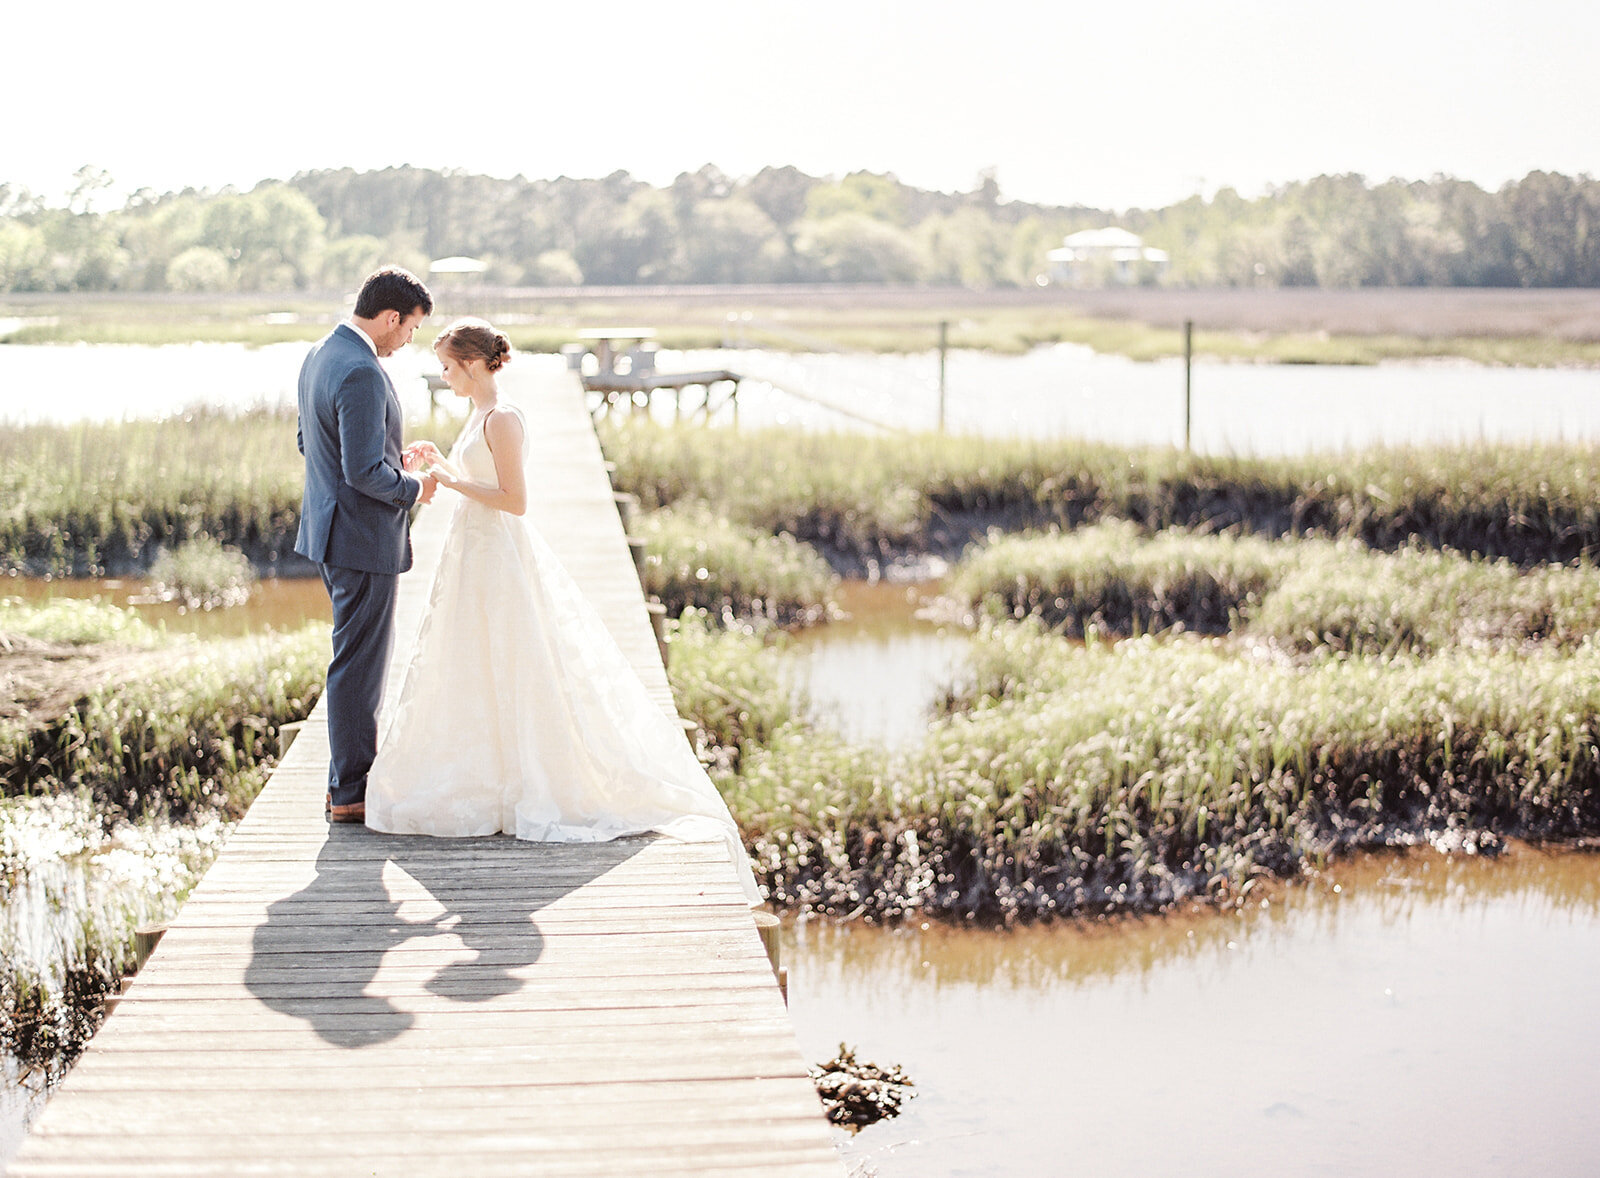 Private wedding in Charleston photographed by wedding photographers in Charleston Amy Mulder Photography